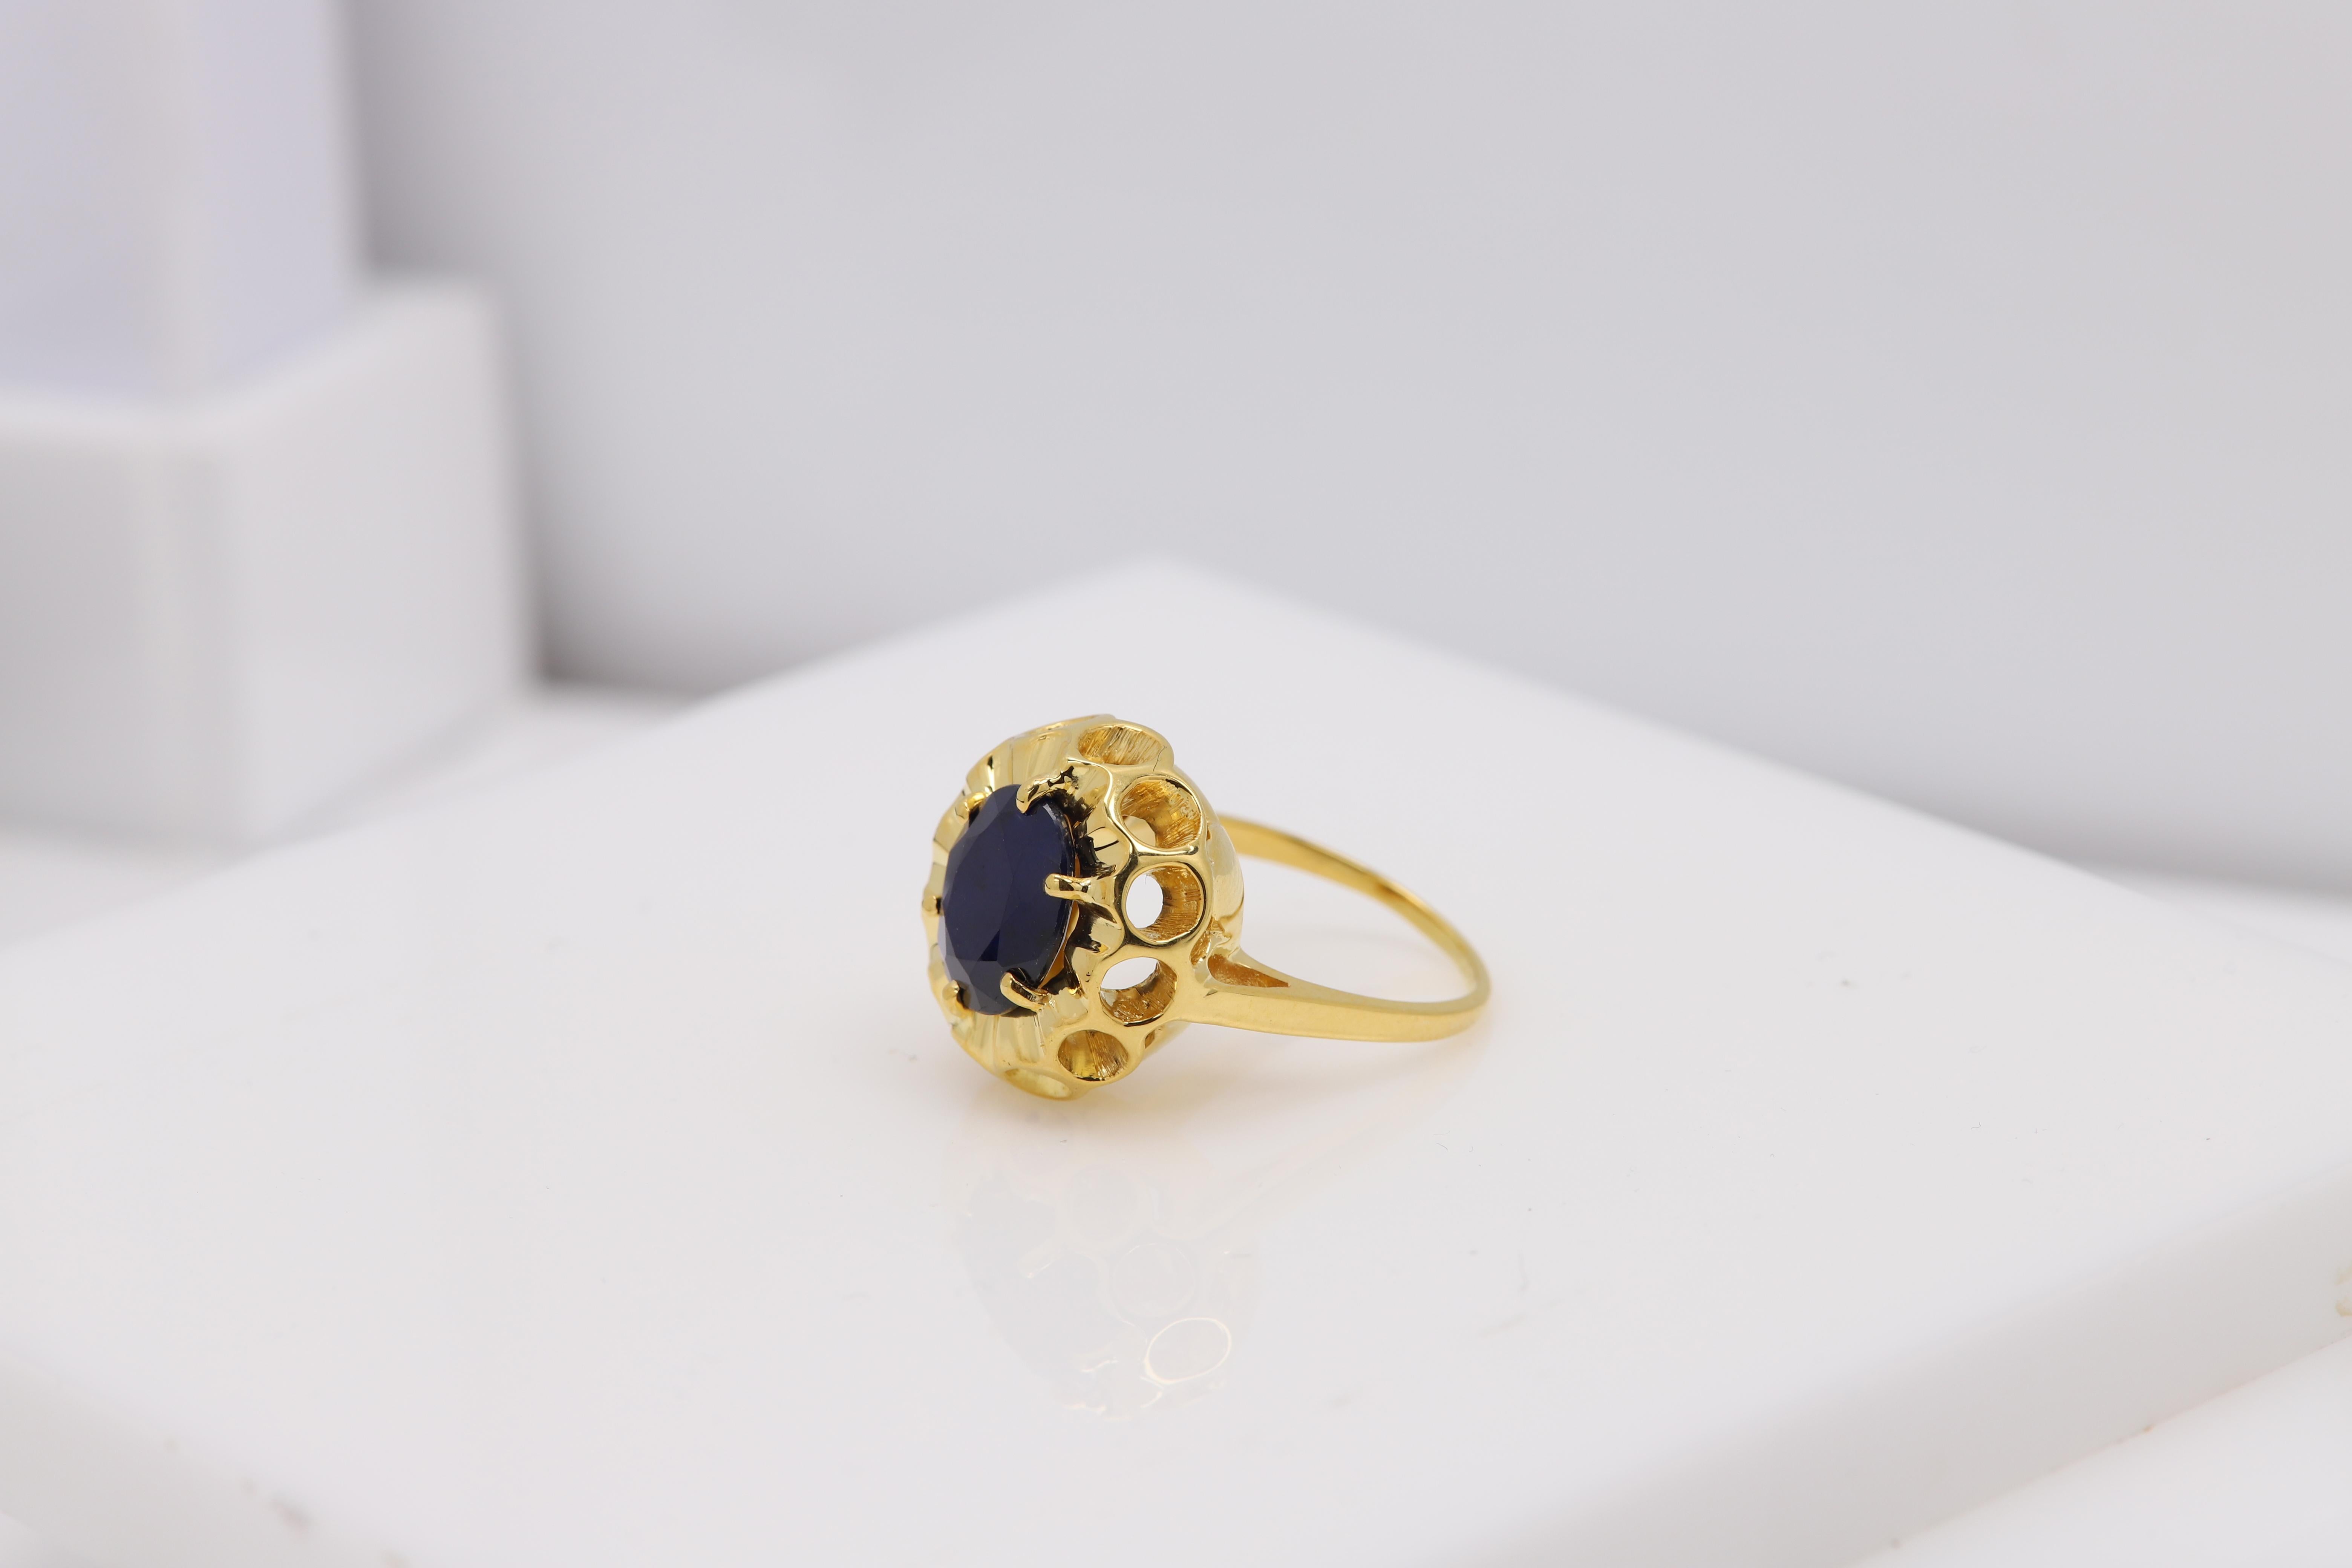 Vintage Sapphire Ring
14k Yellow Gold
Approx weight 7.2 grams
Natural Oval Sapphire size approx 11 x 9 mm 
Finger size 7
overall size from the top area is 18 x 16mm
The Sapphire is opacity on the darker side
this is a real vintage ring that was